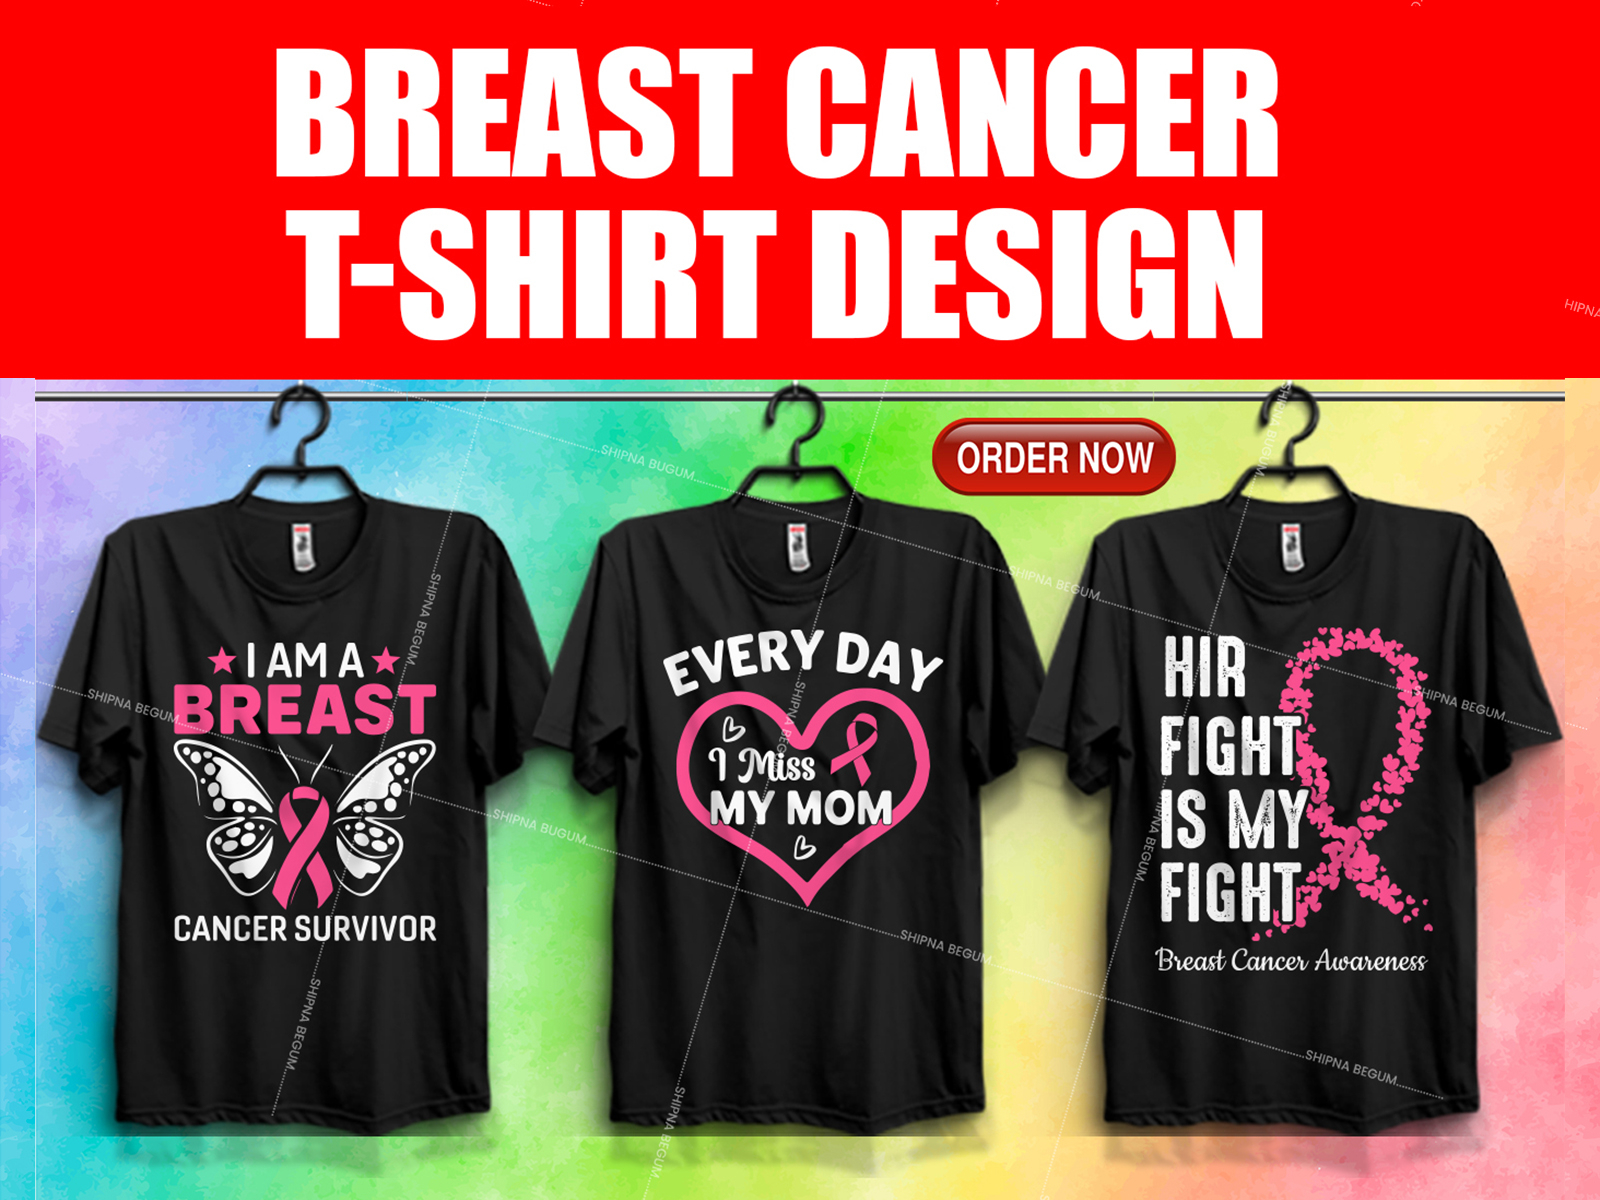 Breast Cancer T-SHIRT DESIGN by Shipna Begum on Dribbble